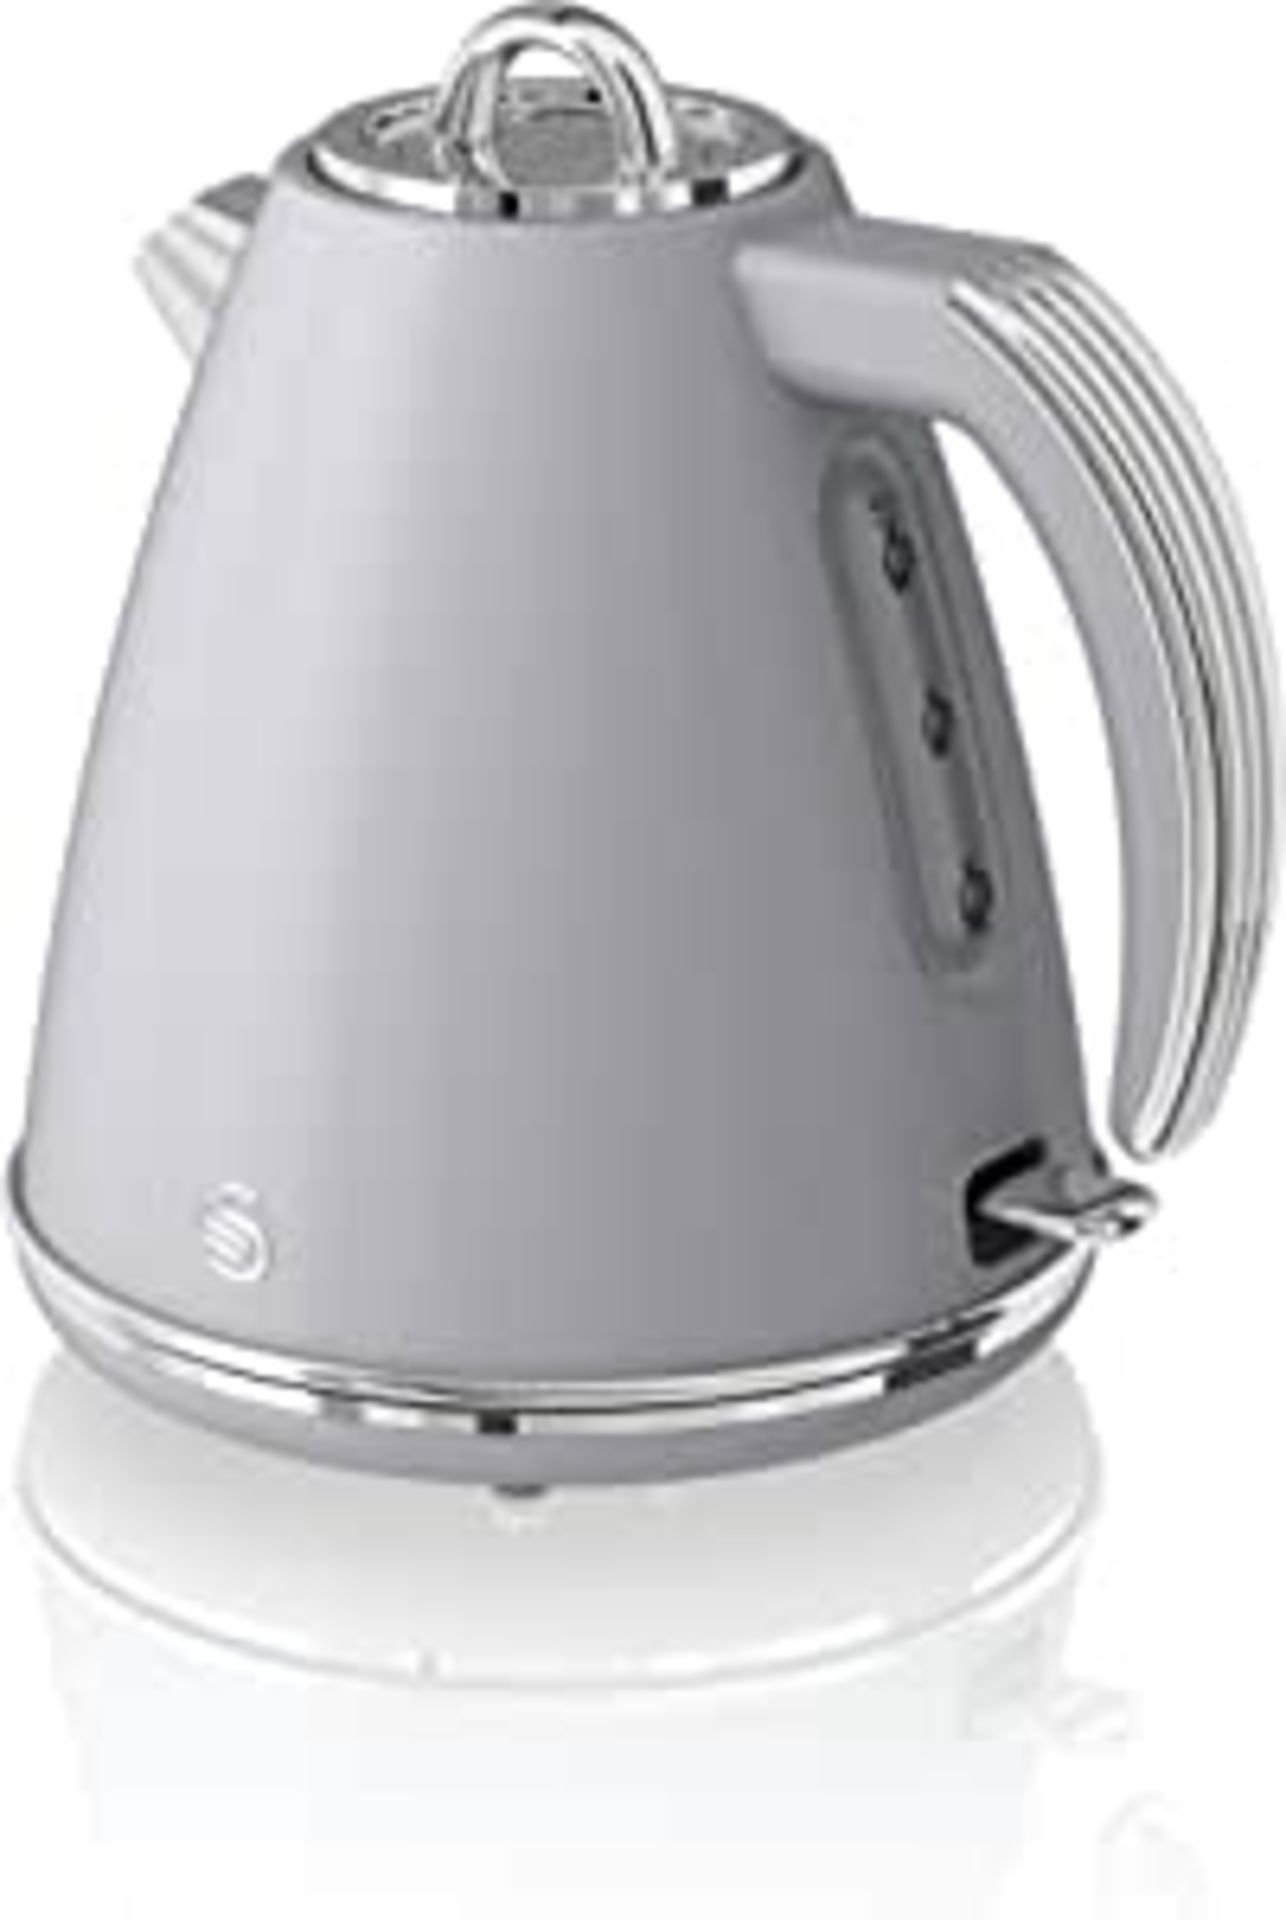 RRP-£32 Swan Retro 1.5 Litre Jug Kettle, Grey, with 360 Degree Rotational Base, 3KW Fast Boil, Easy